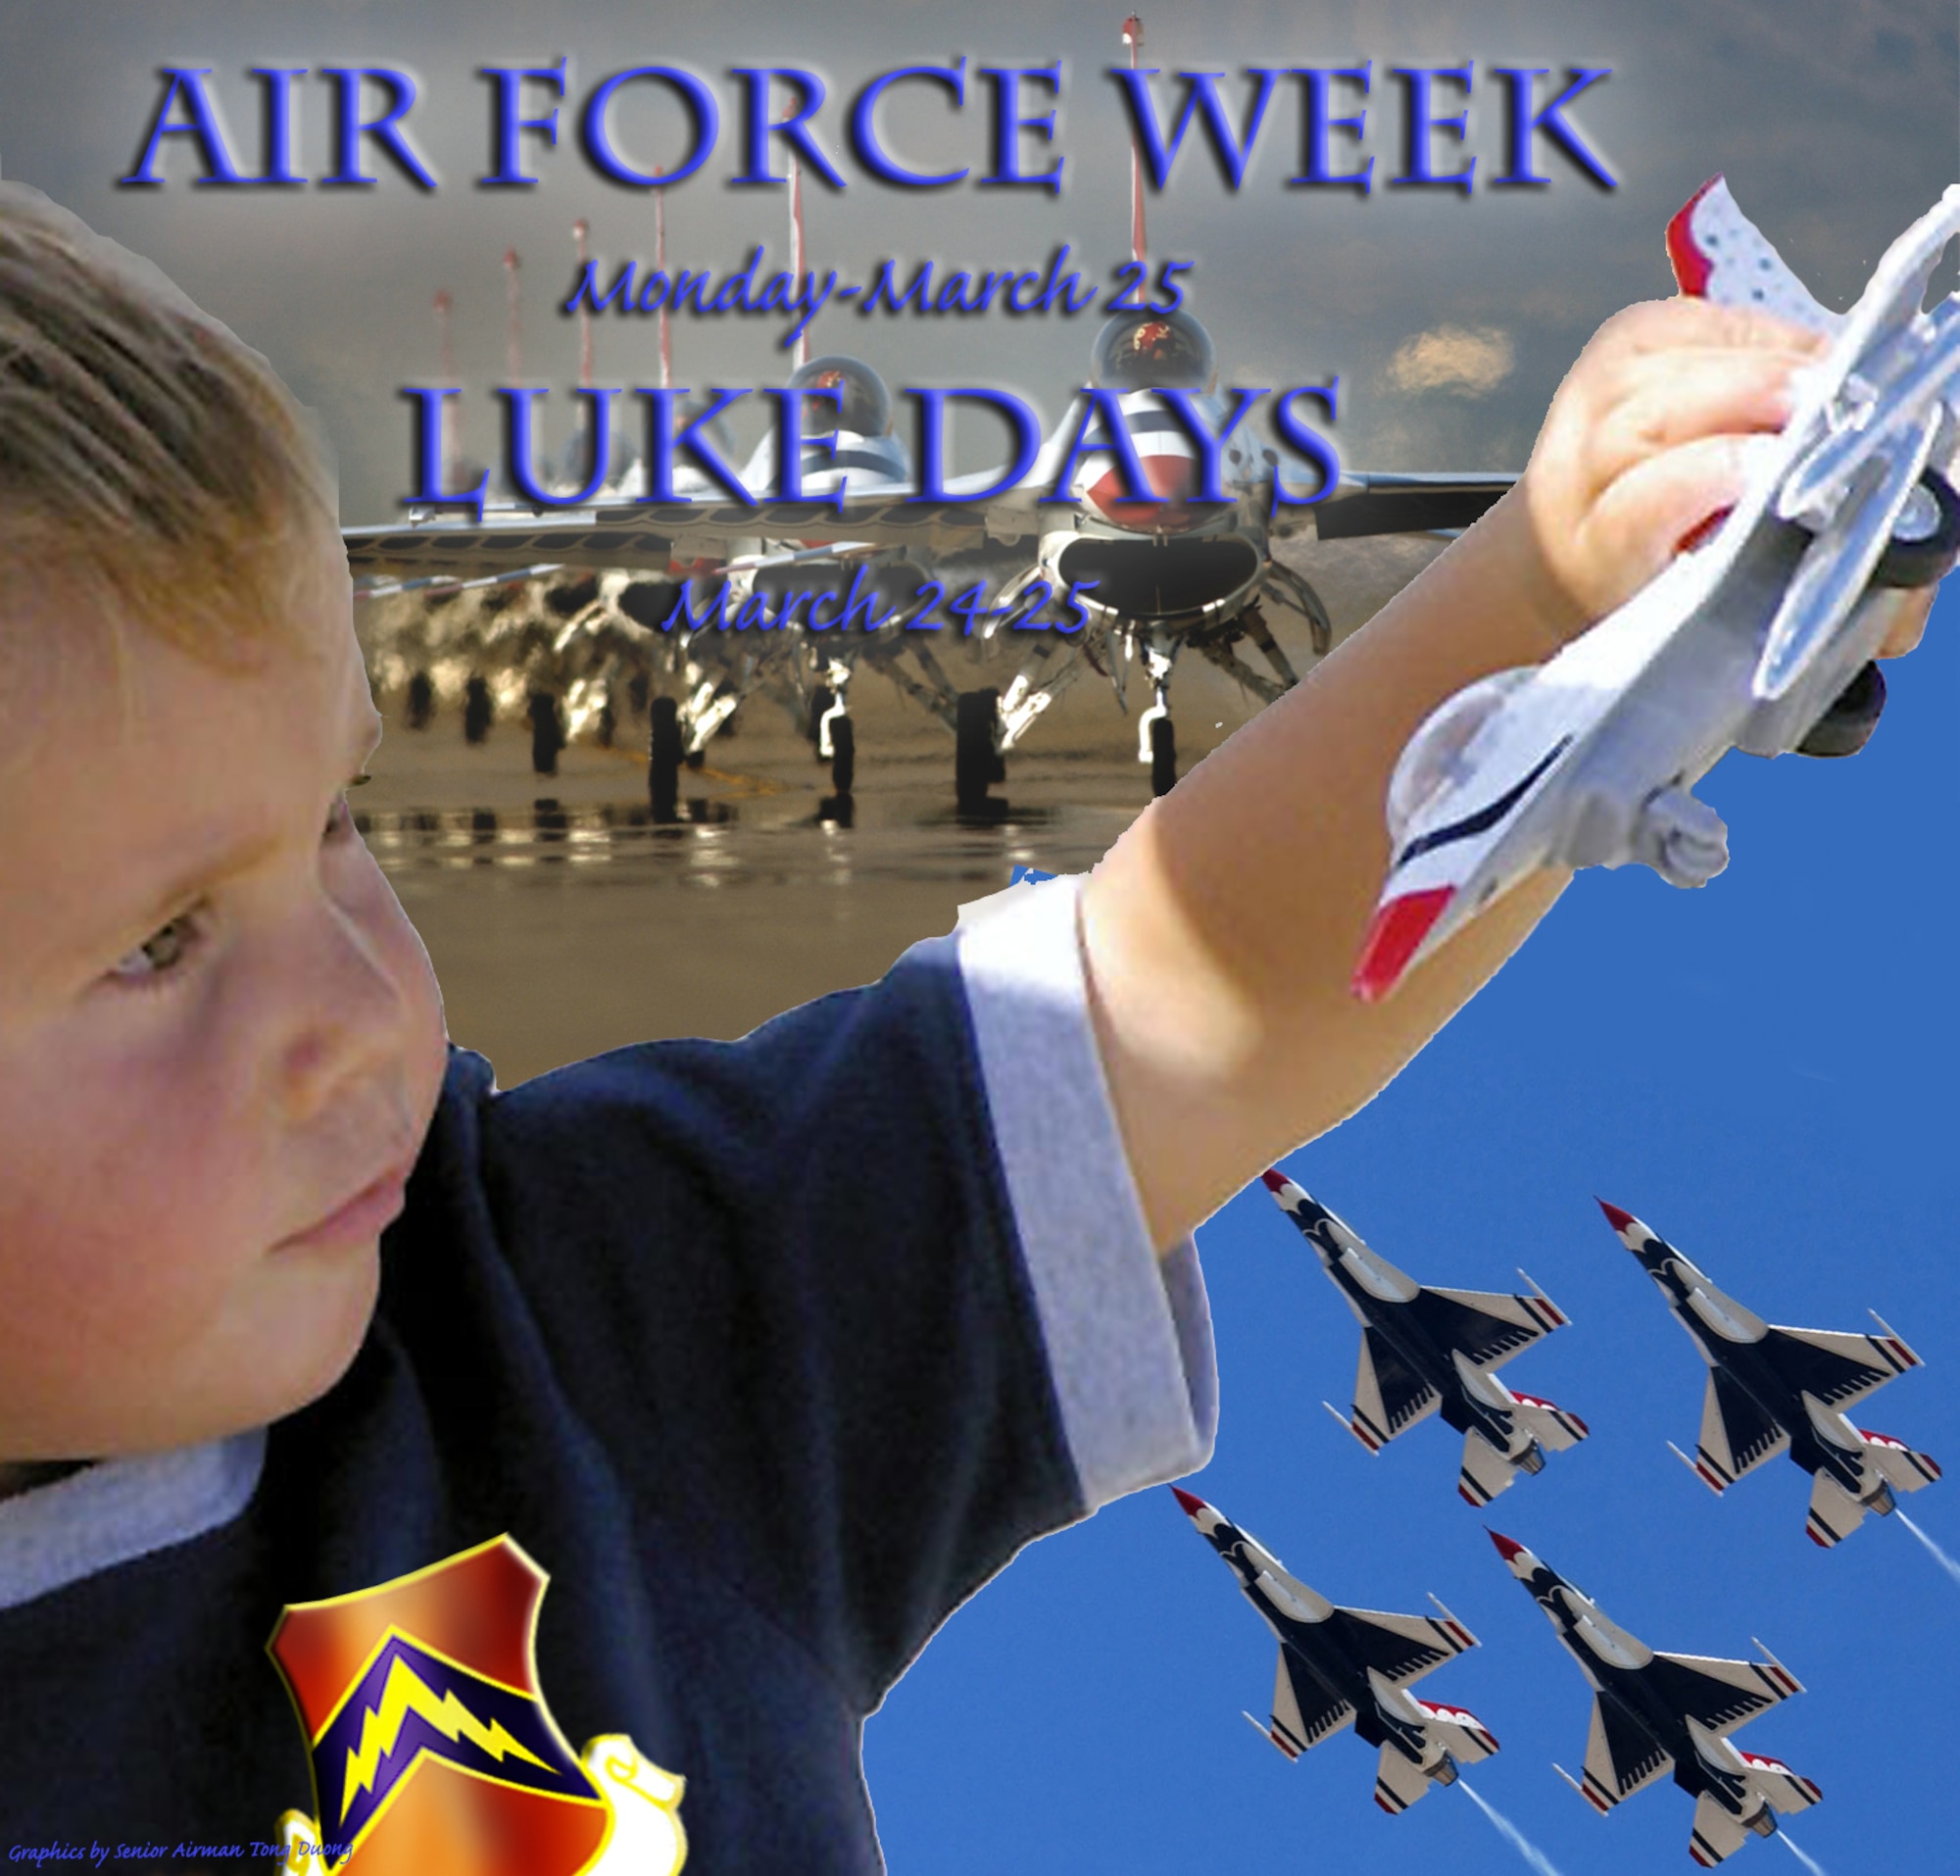 Luke Days Air Show March 24 and 25 celebrates the 60th anniversary of the Air Force. Everyone is welcome to attend; admission is free. For a schedule of events, directions to the base and parking information